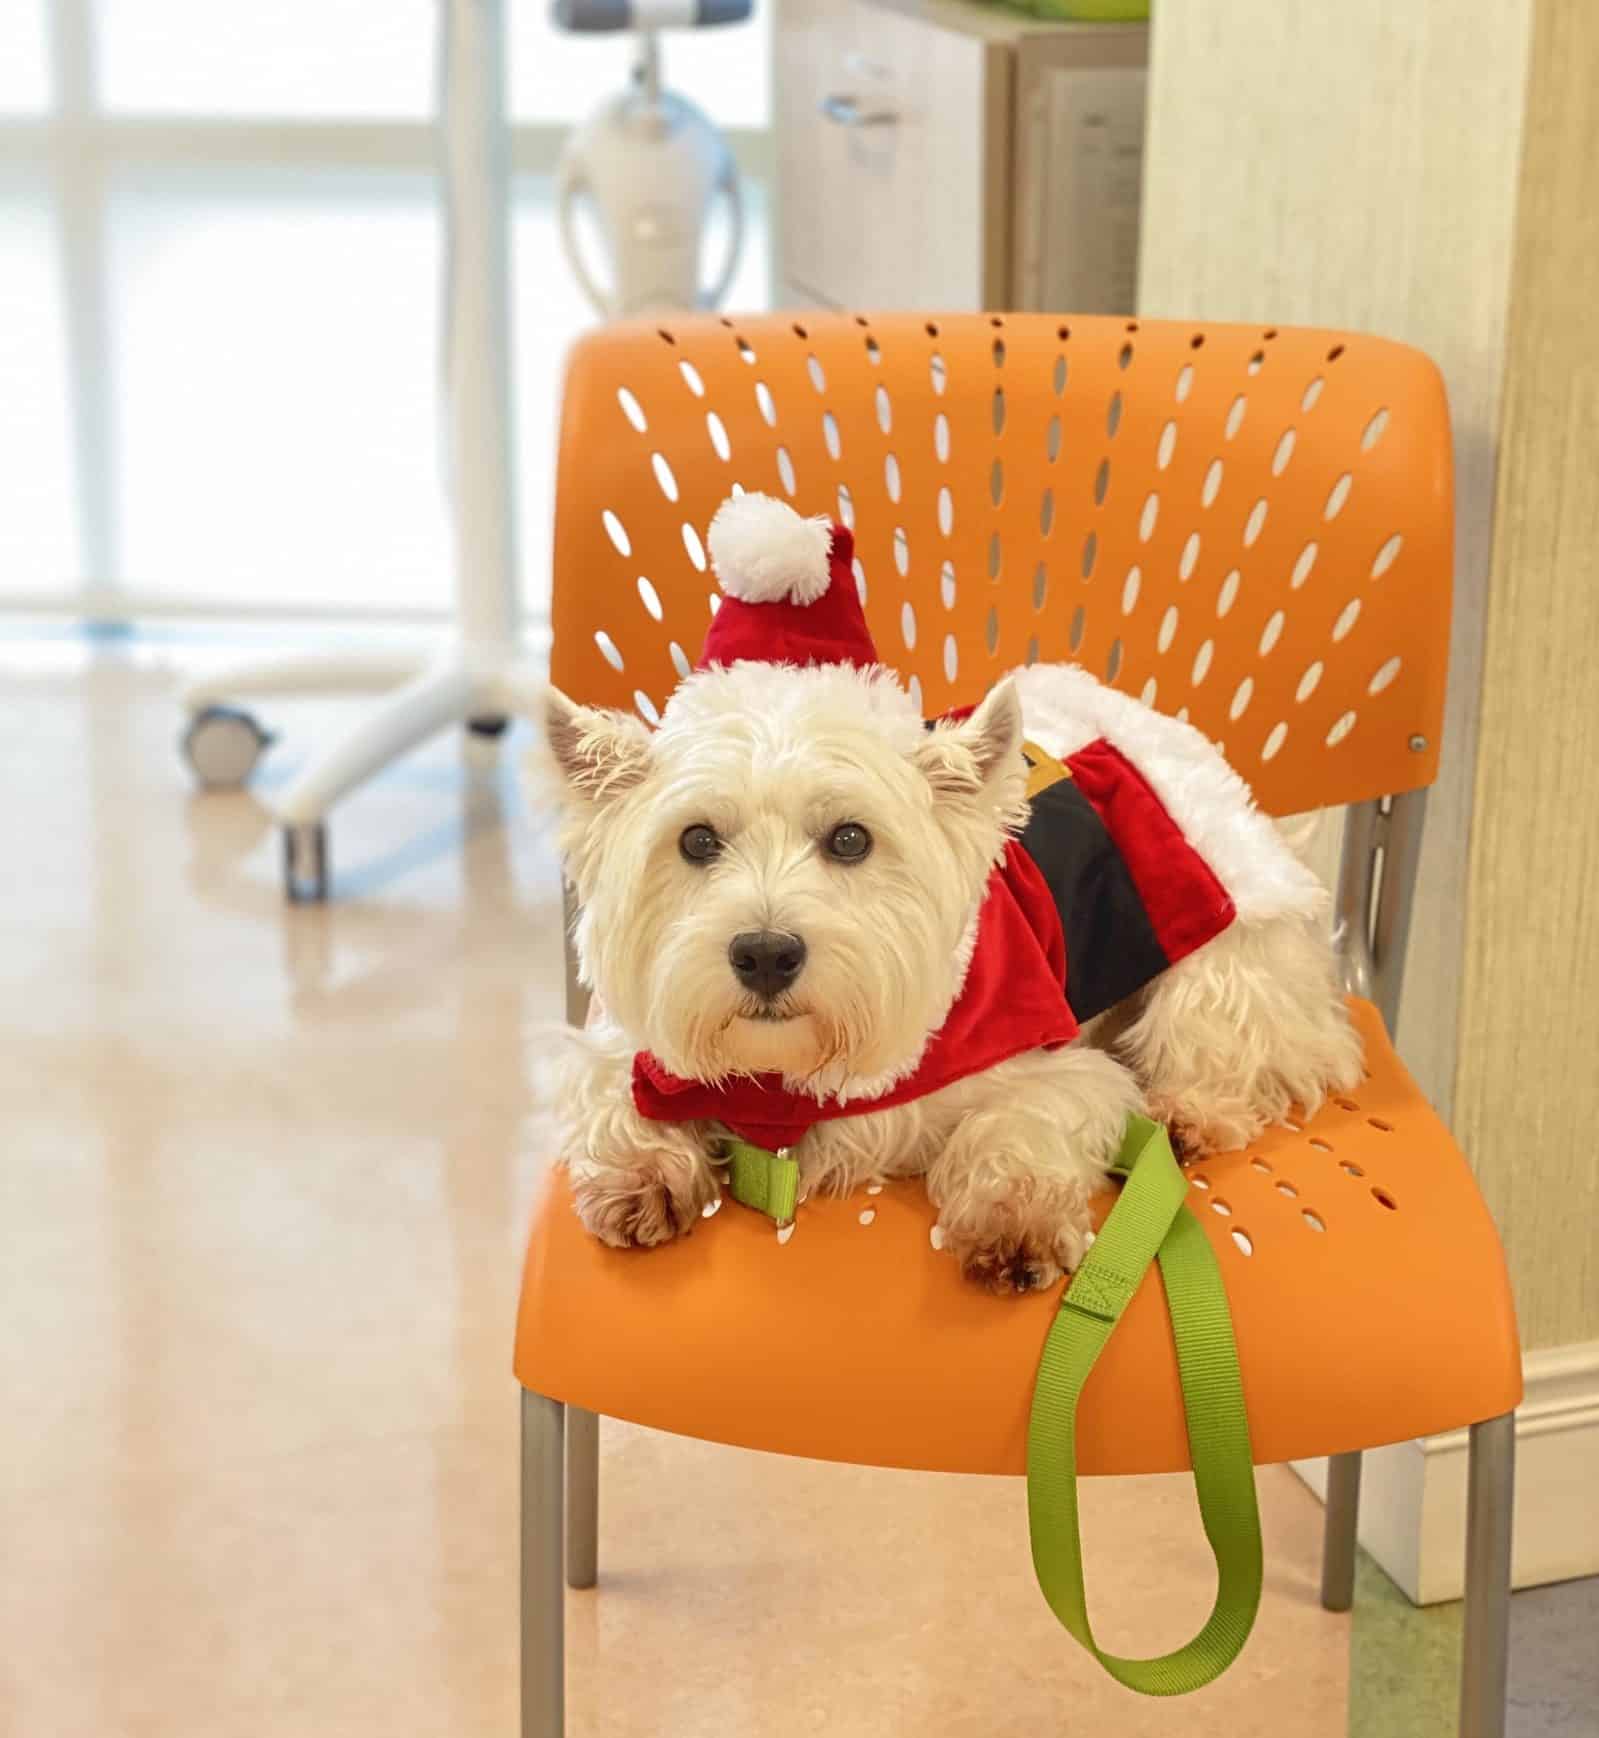 Our therapy dog sugar dressed up as santa to bring some cheer to patients